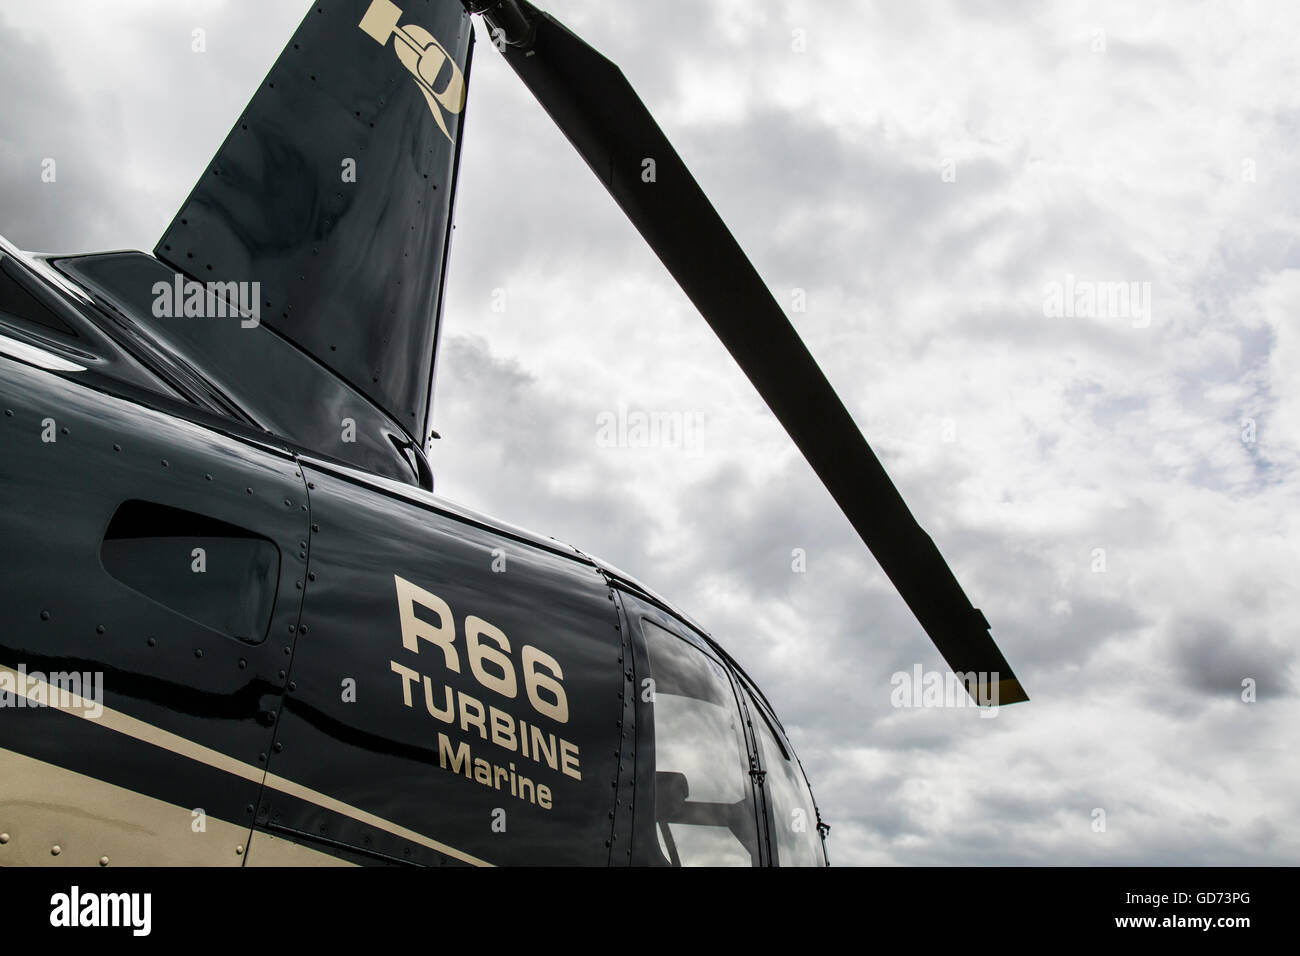 Detail of the rotors and hub of a Robinson R66 Turbine Marine helicopter. Stock Photo